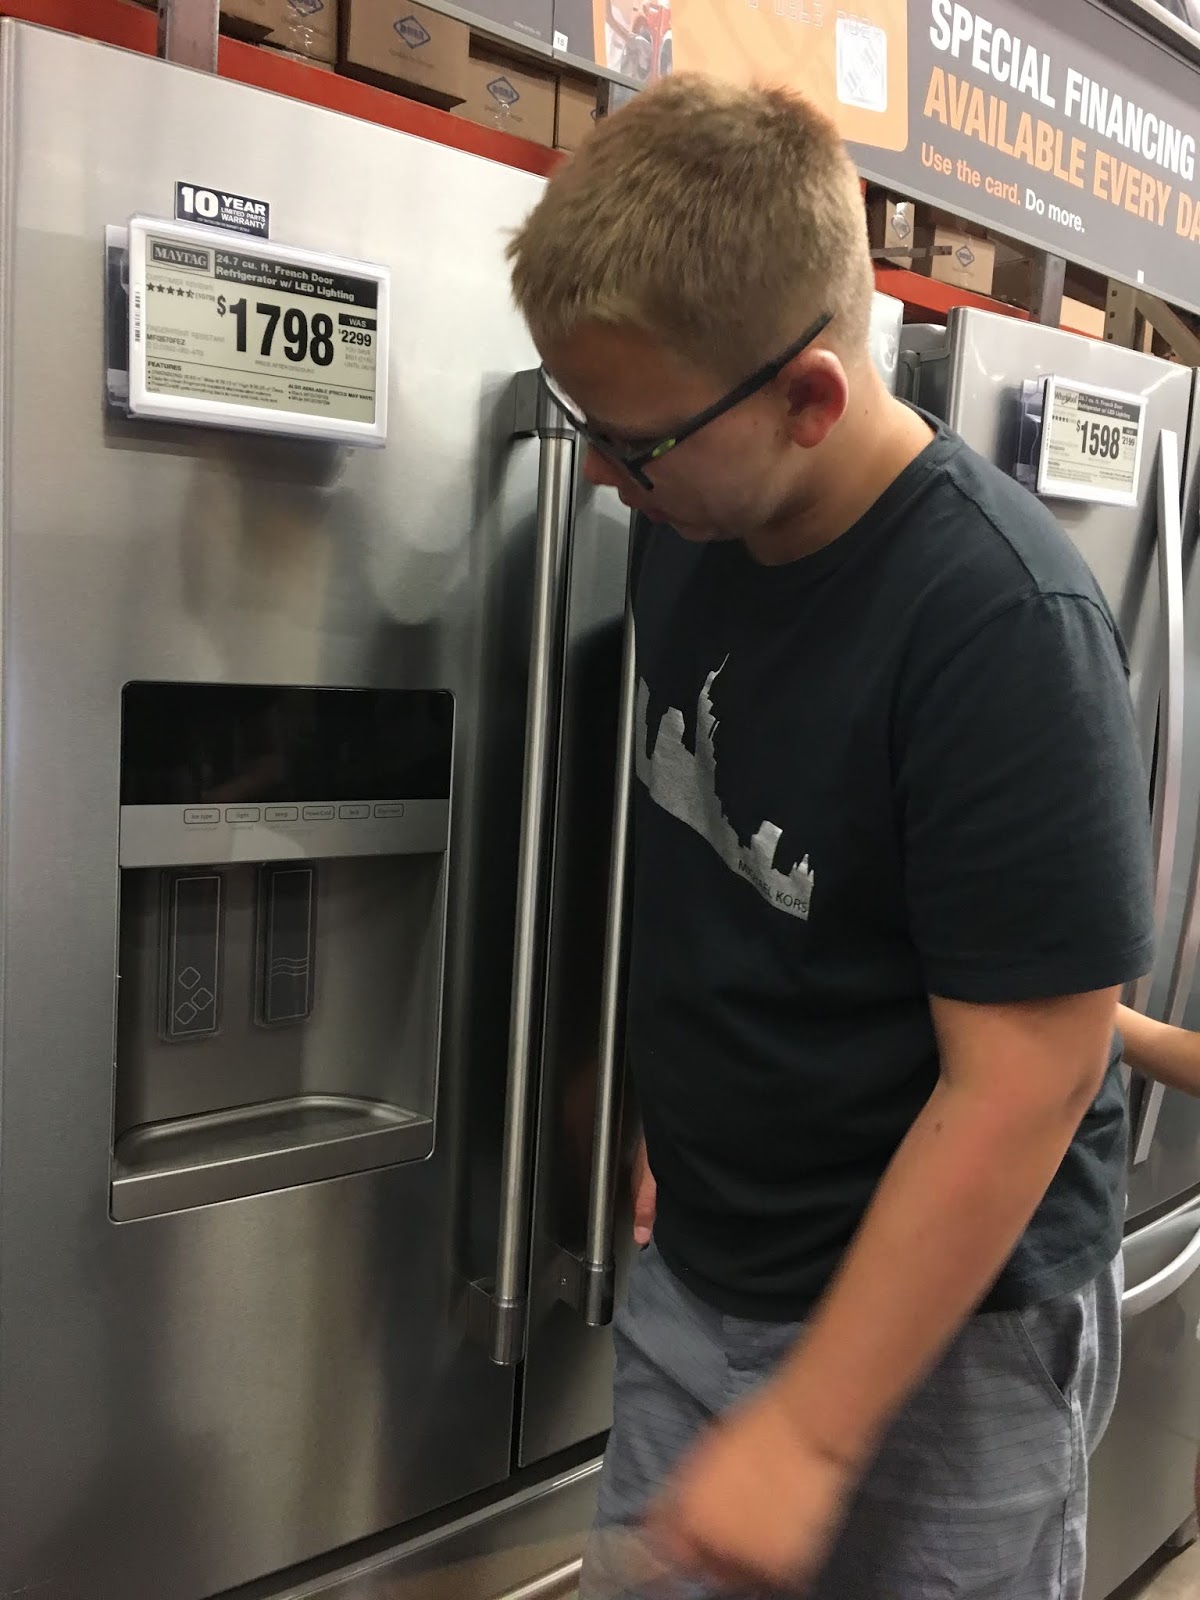 A male teenager examines a refridgerator at the home depot. 